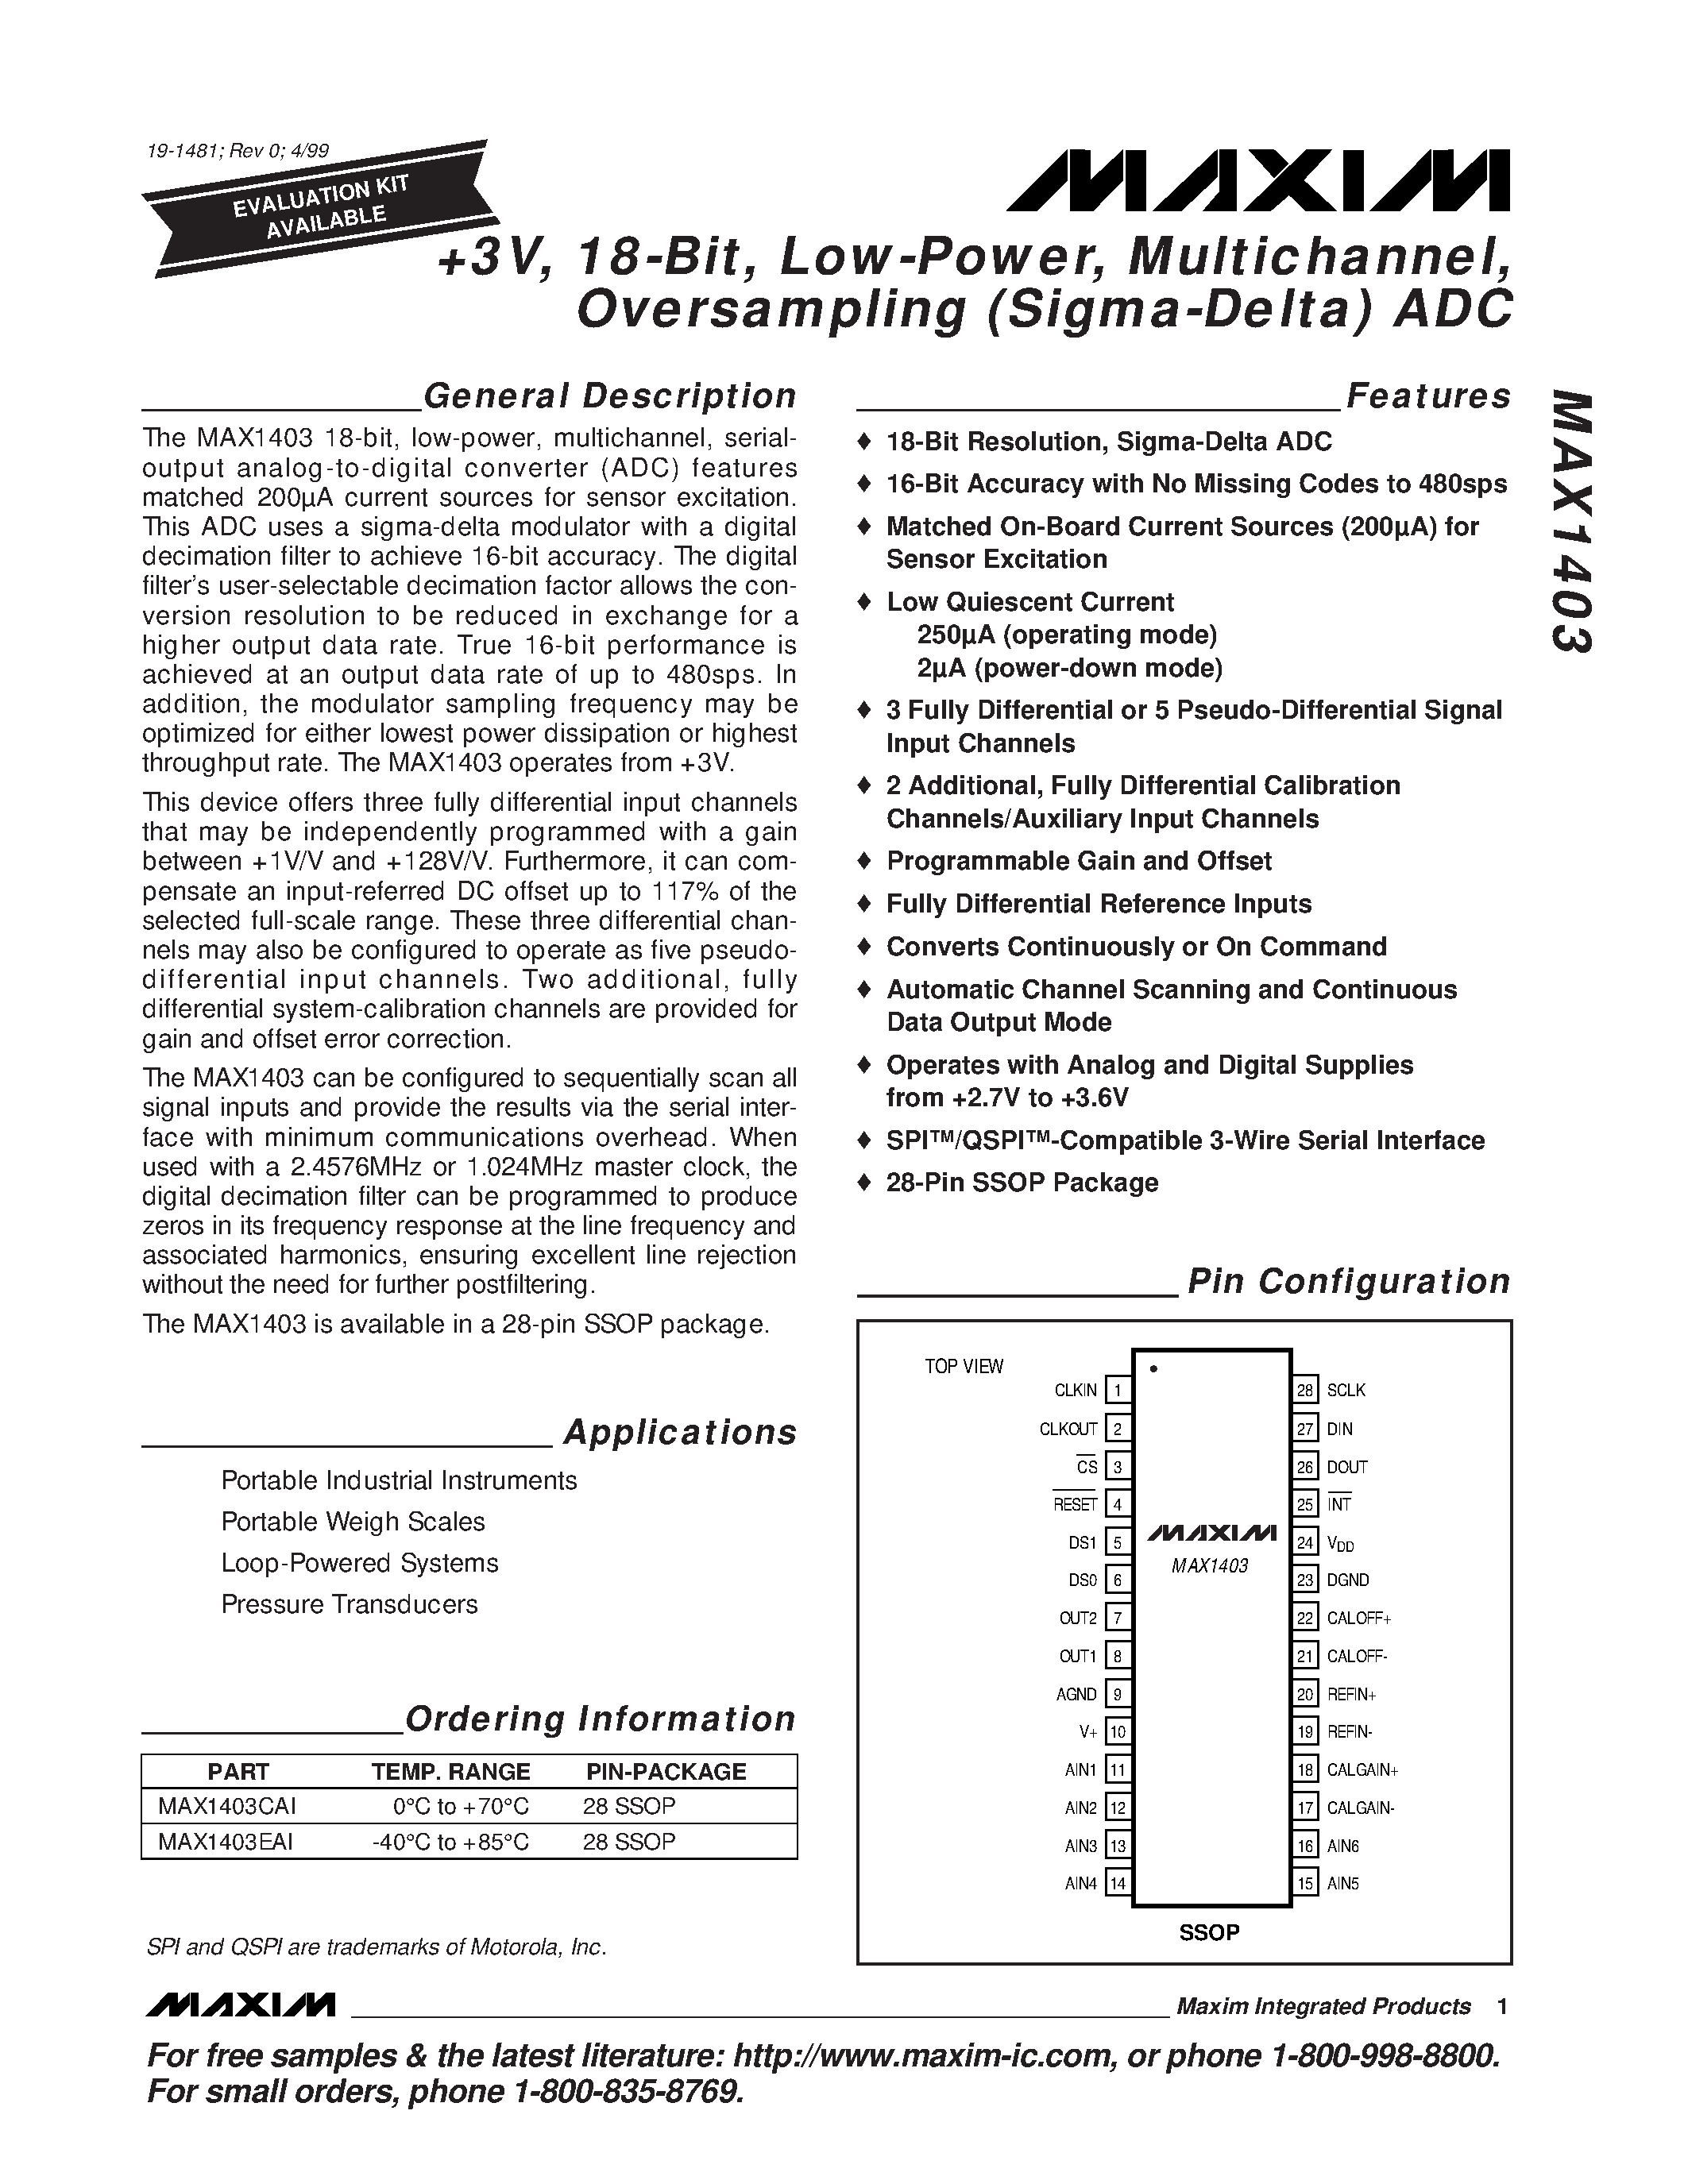 Datasheet MAX1403 - +3V / 18-Bit / Low-Power / Multichannel / Oversampling Sigma-Delta ADC page 1